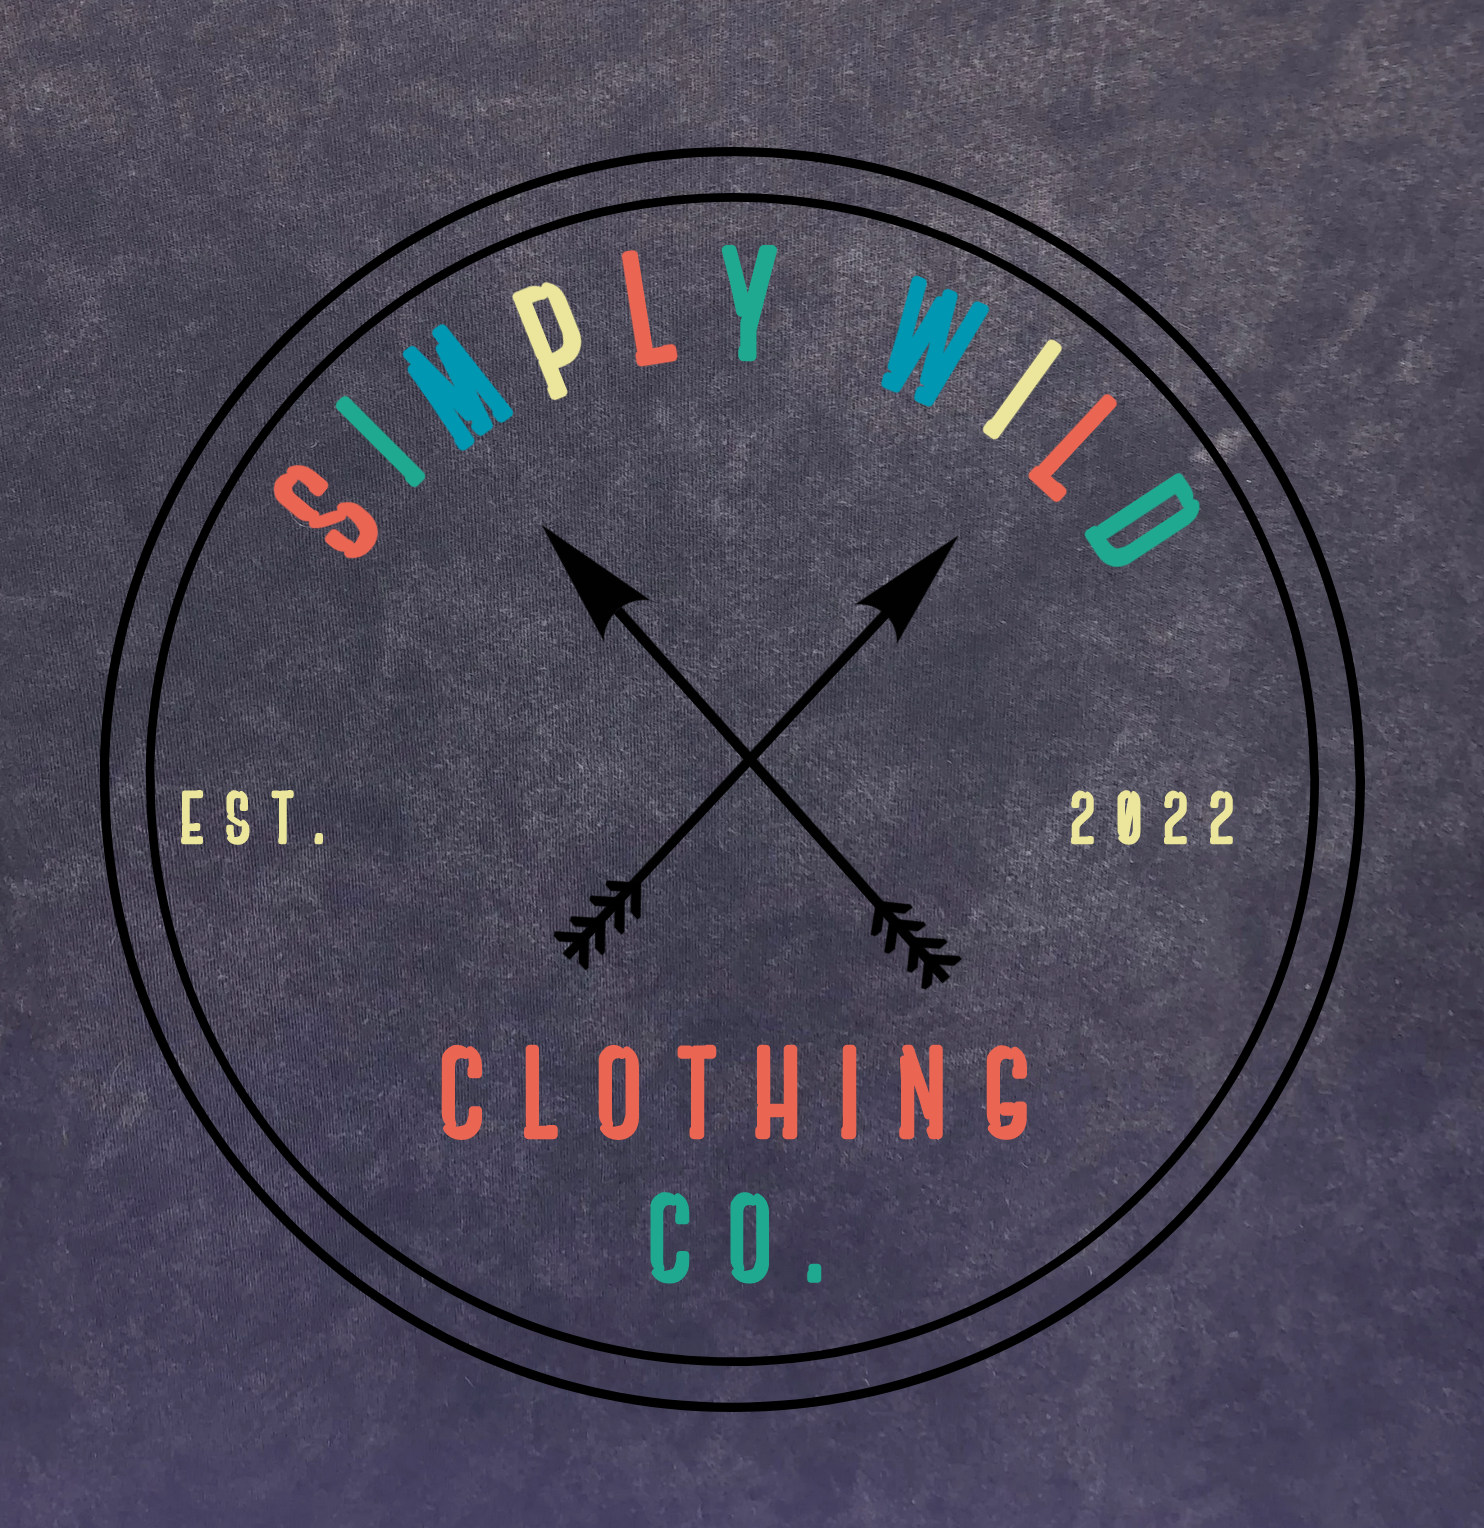 Simply Wild Clothing Co.